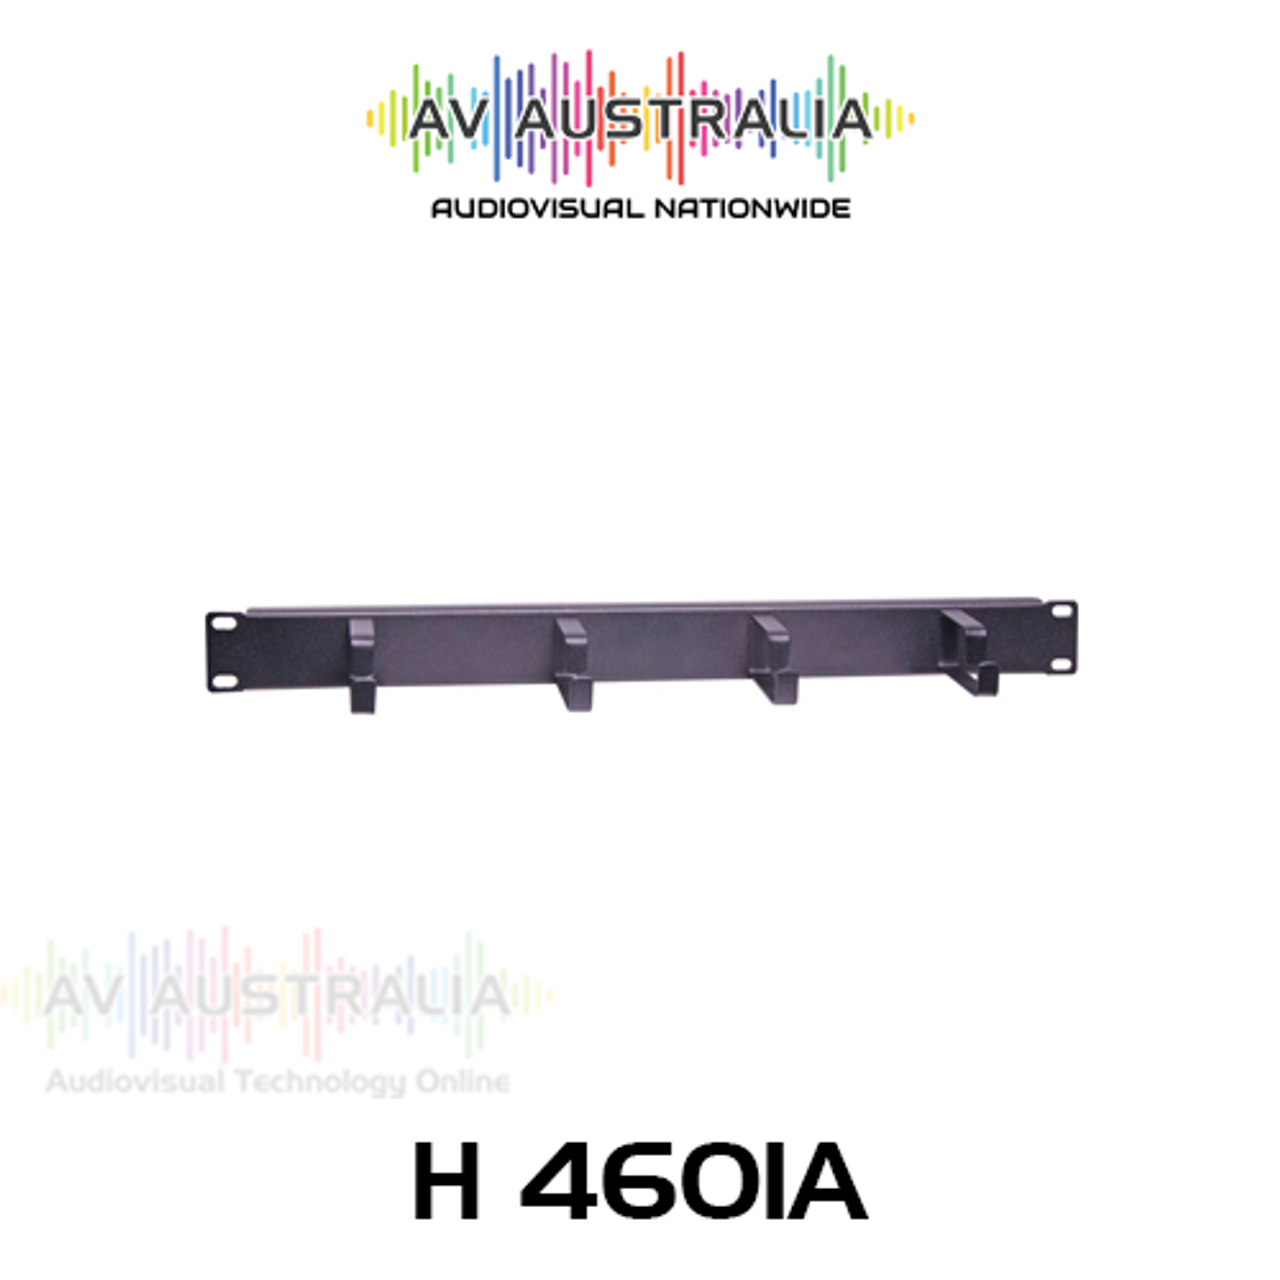 19" Rack Panel Cable Hanger